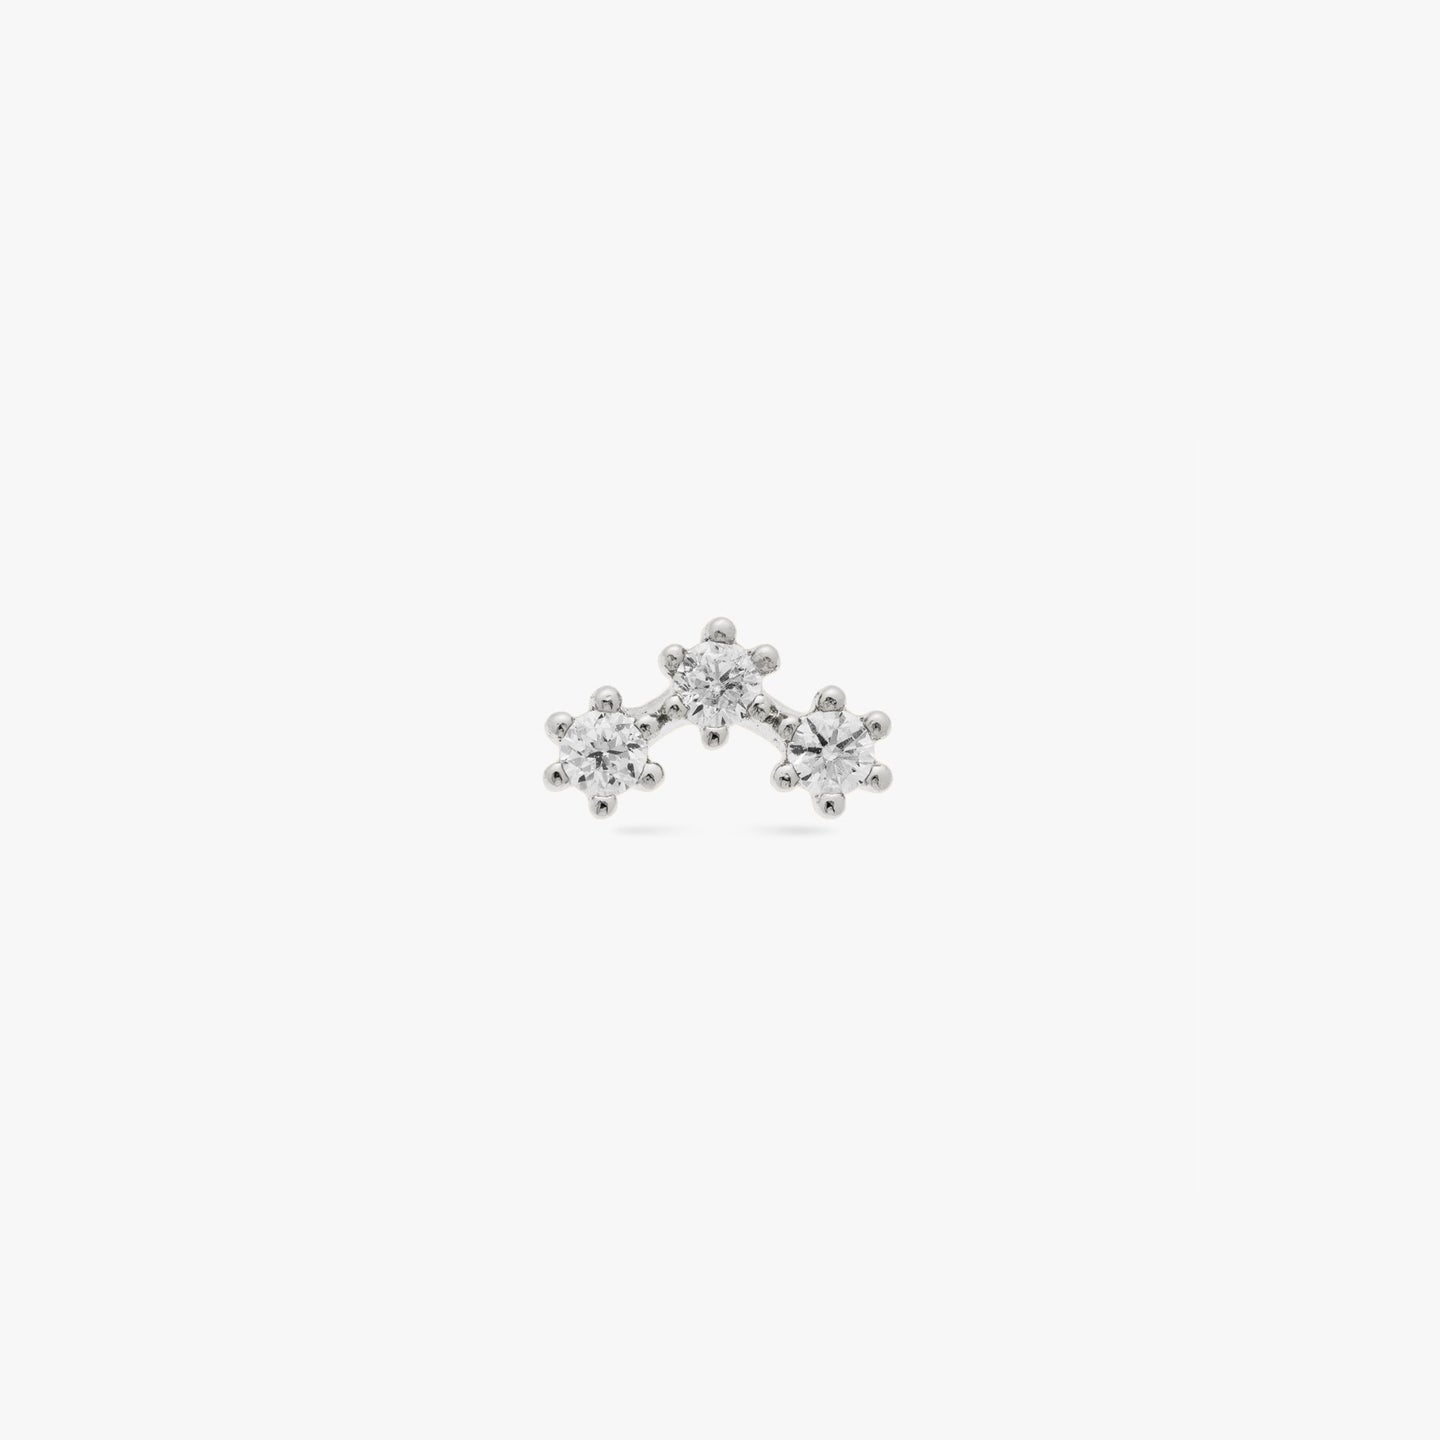 A silver cluster shaped stud with clear czs and a flatback post color:null|silver/clear